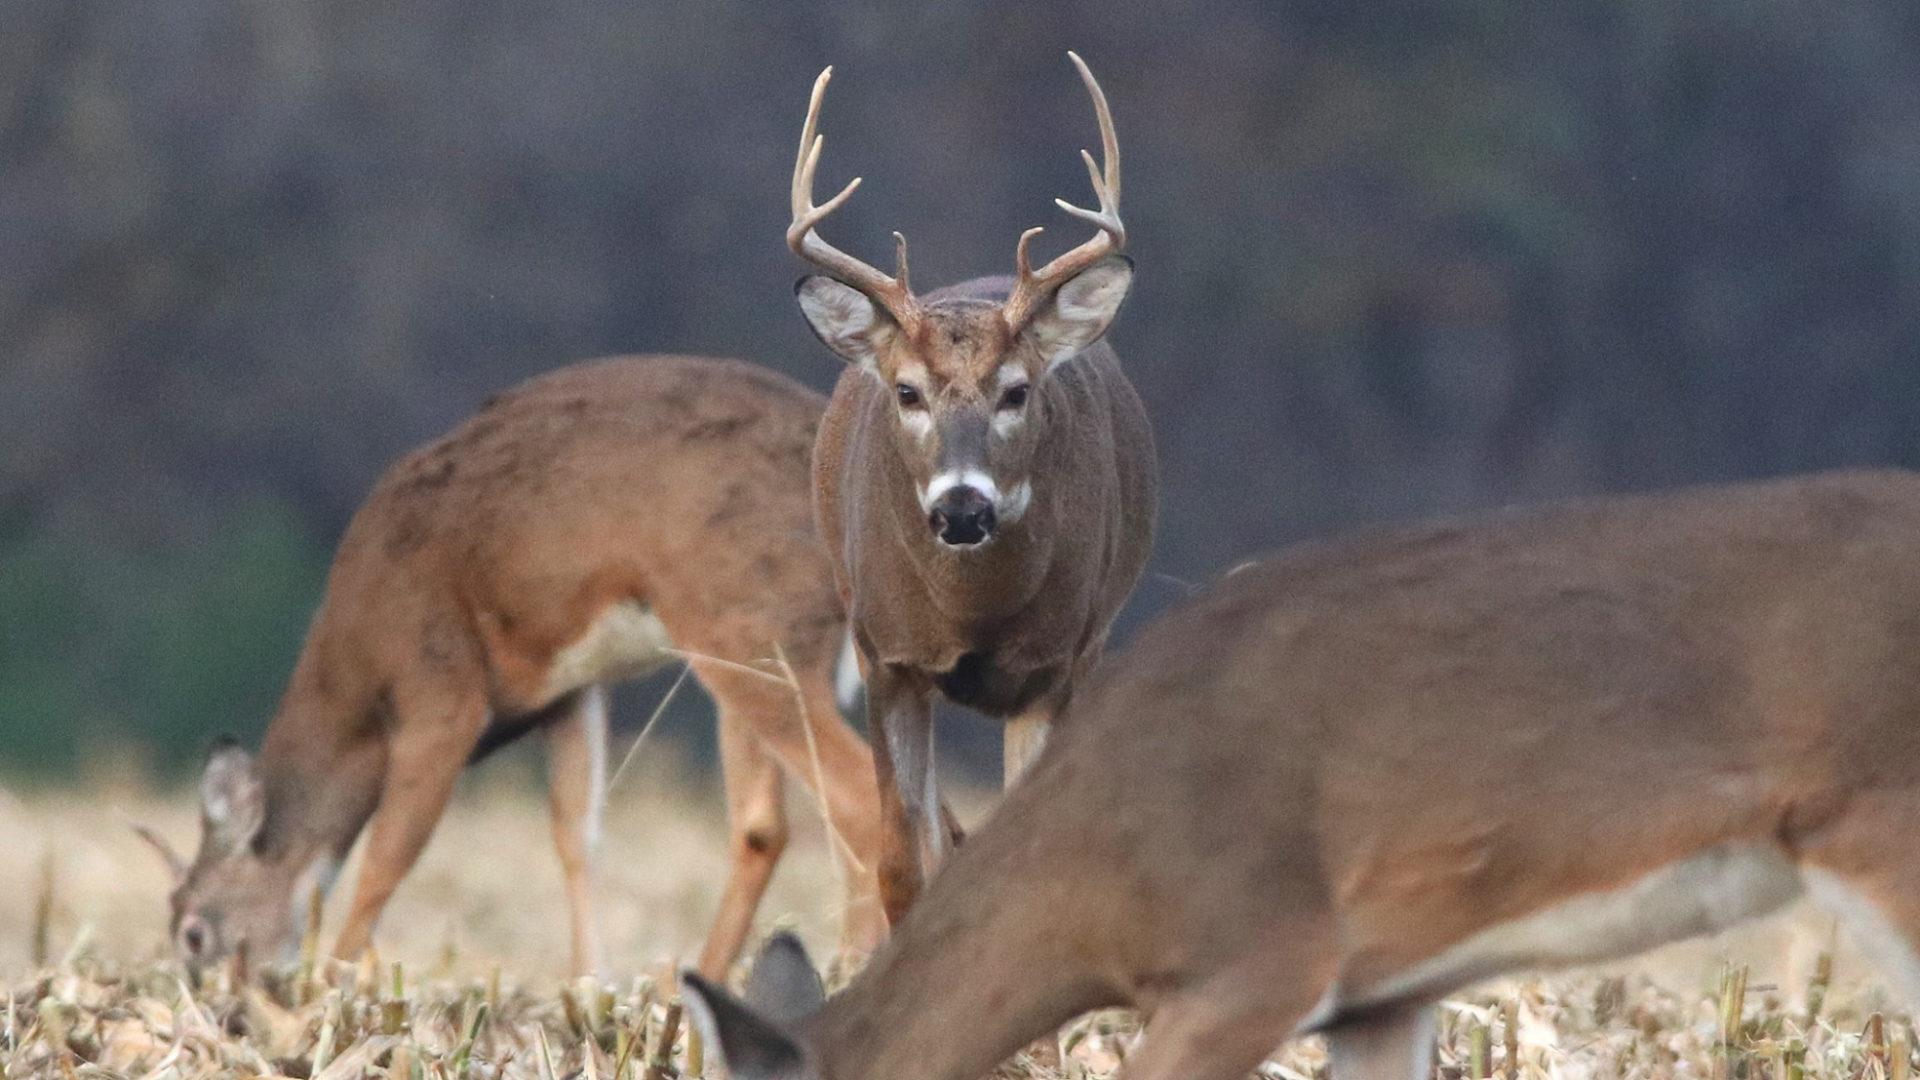 Three deer are grazing in a field. Two have their heads down. One deer, a male with large antlers, stares directly into the camera.